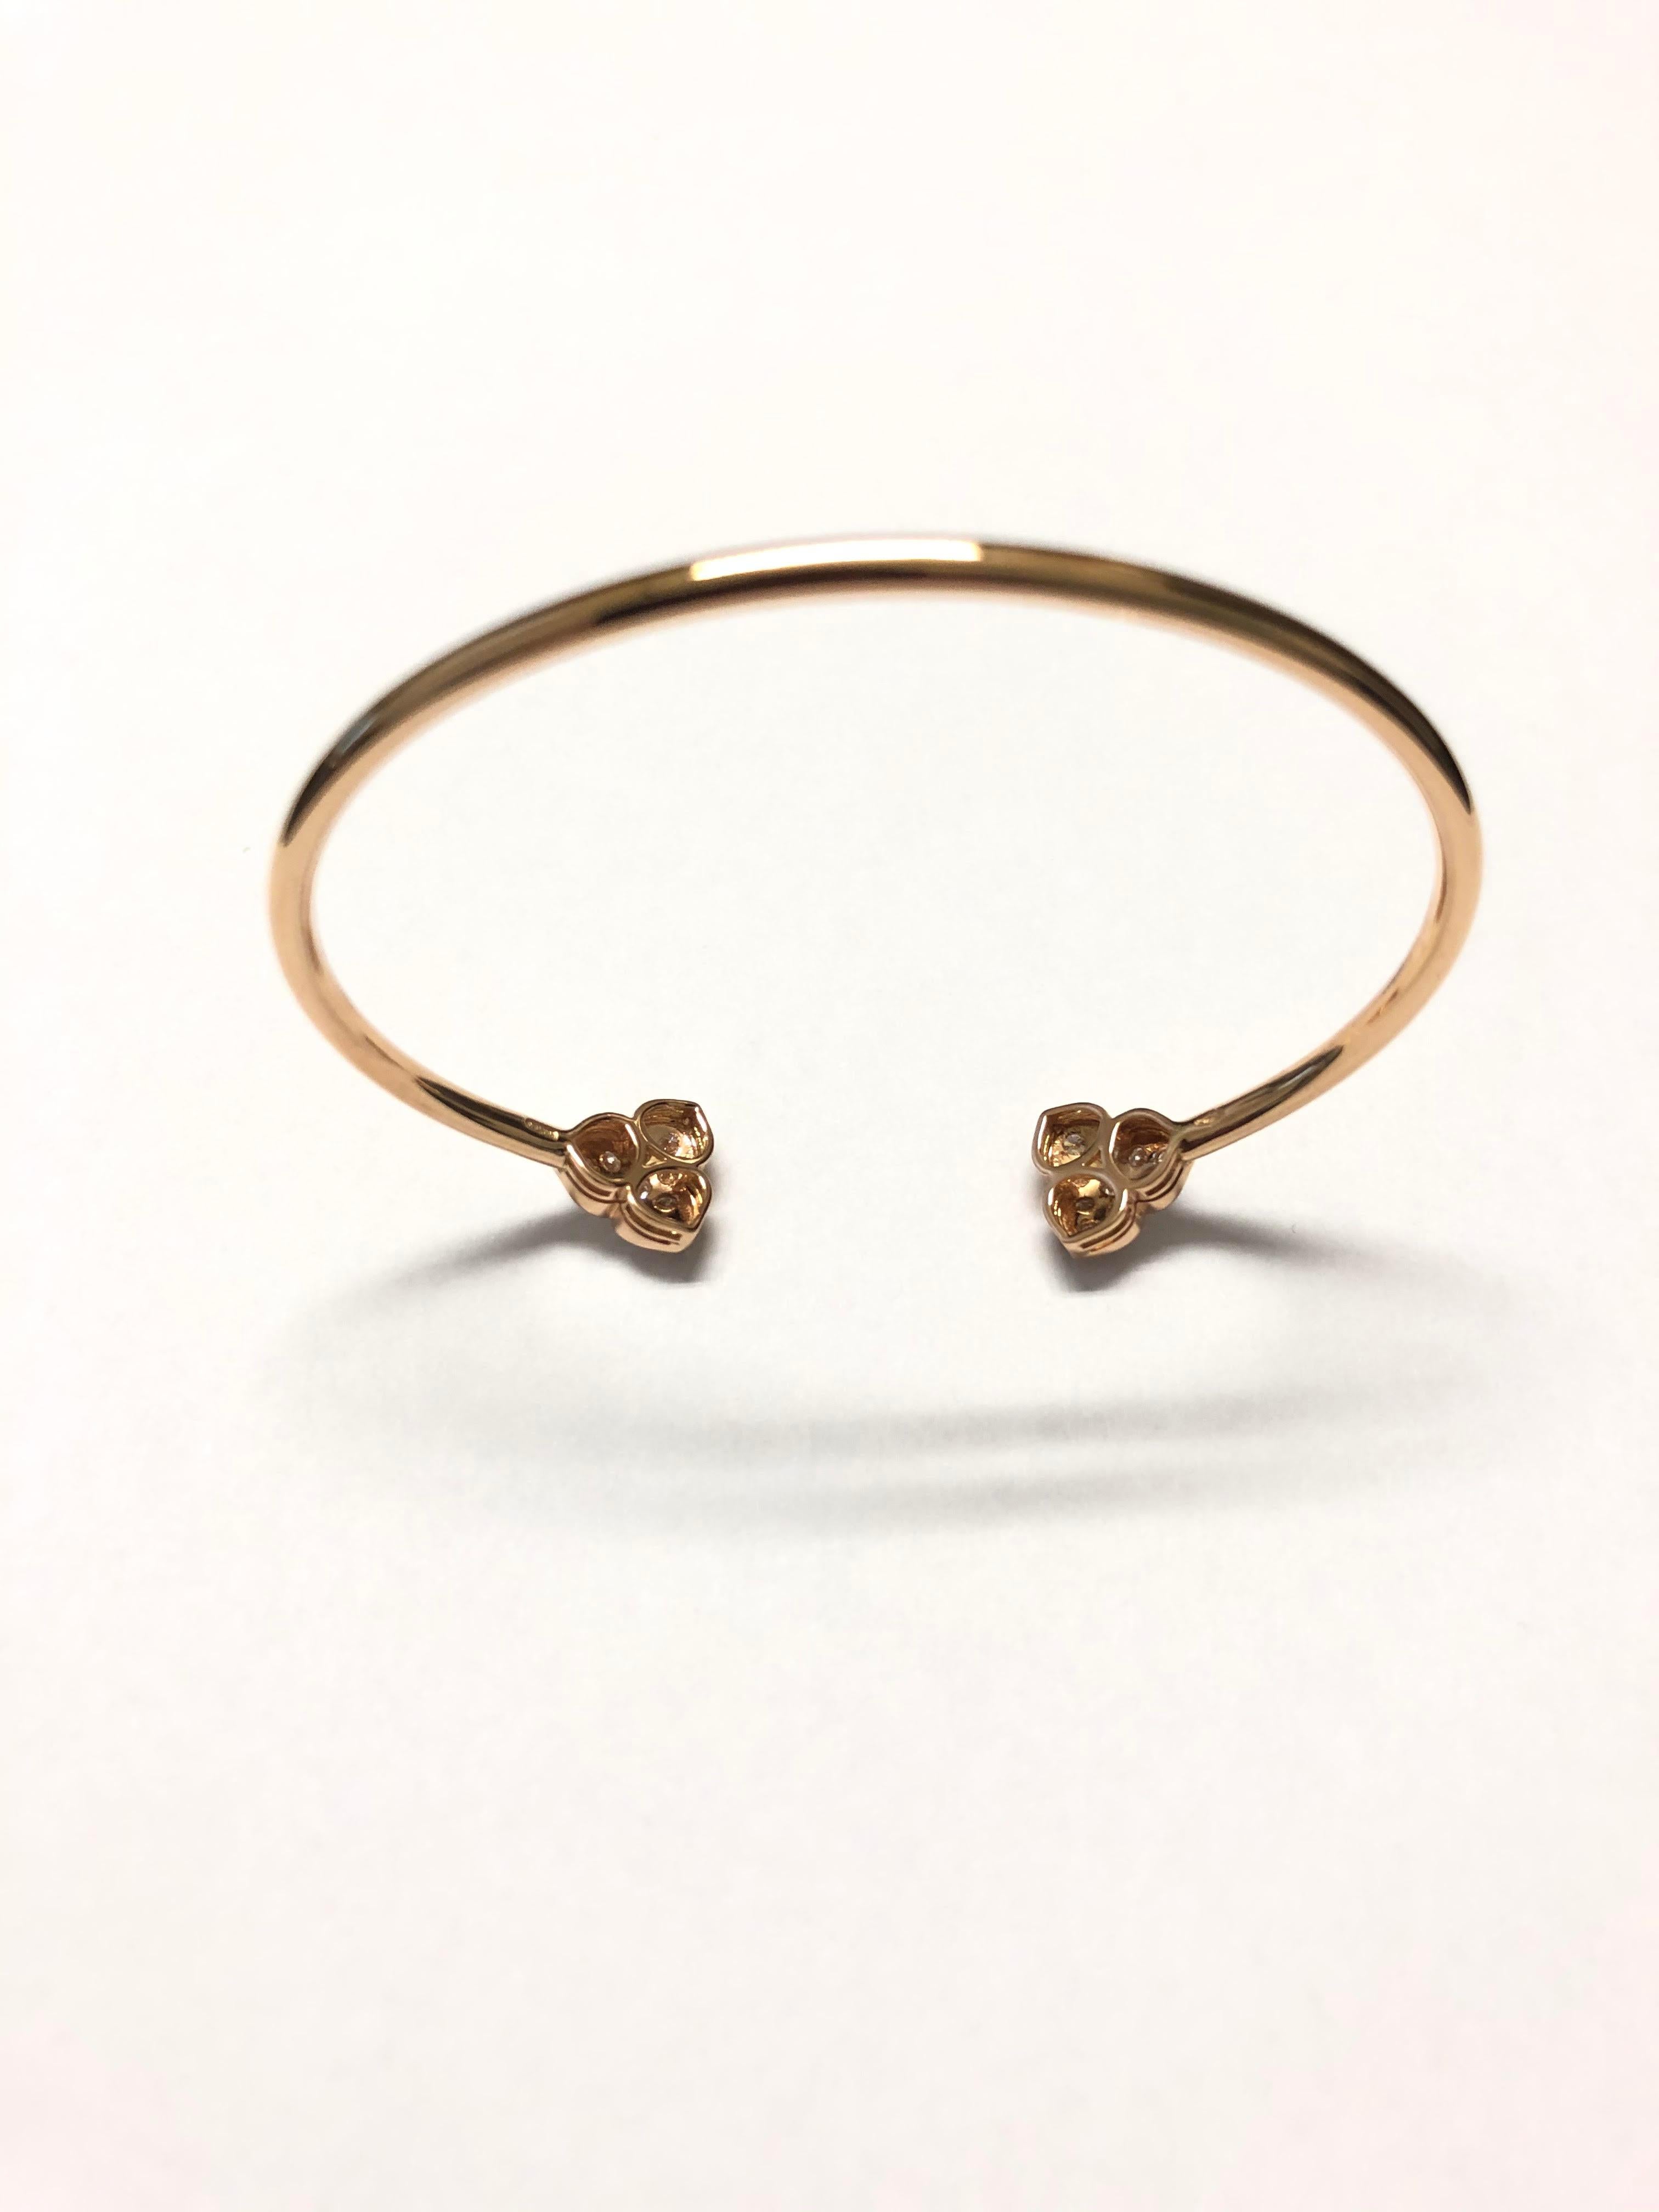 18 Carat Rose Gold Round Cut Diamond Bangle Bracelet featuring 0,71 carats G color, VVS clarity. Total piece weight 6,60 gr
Bangle size M : 16cm (45x55 mm) 2 cm space between the two paved flowers
Handmade in Italy
Ready in stock

Natura